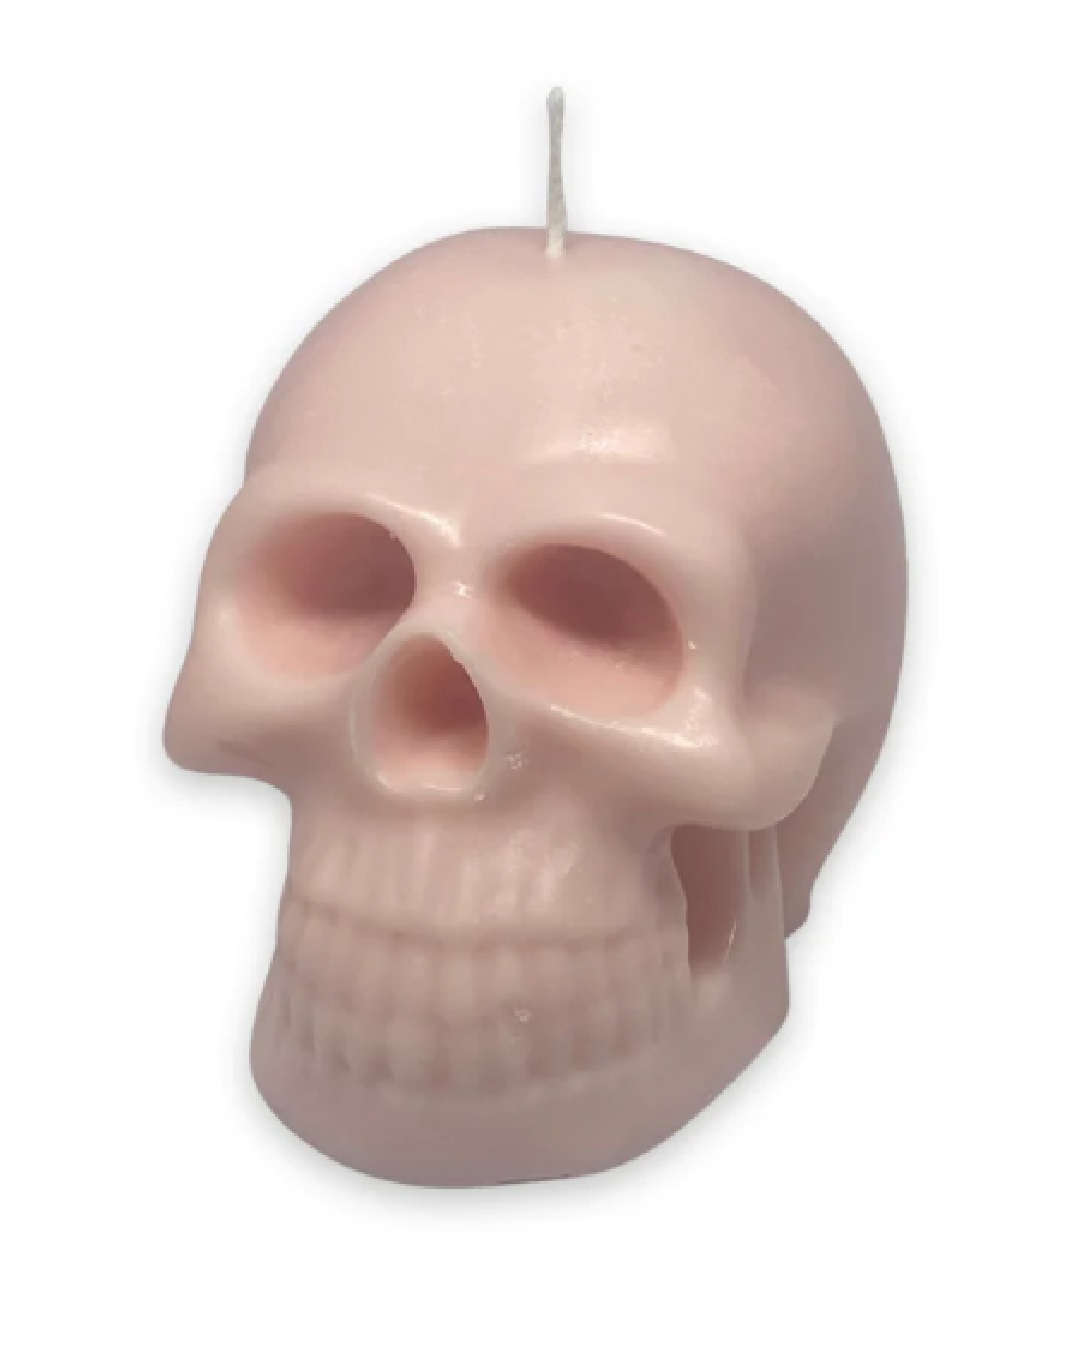 Pink skull candle